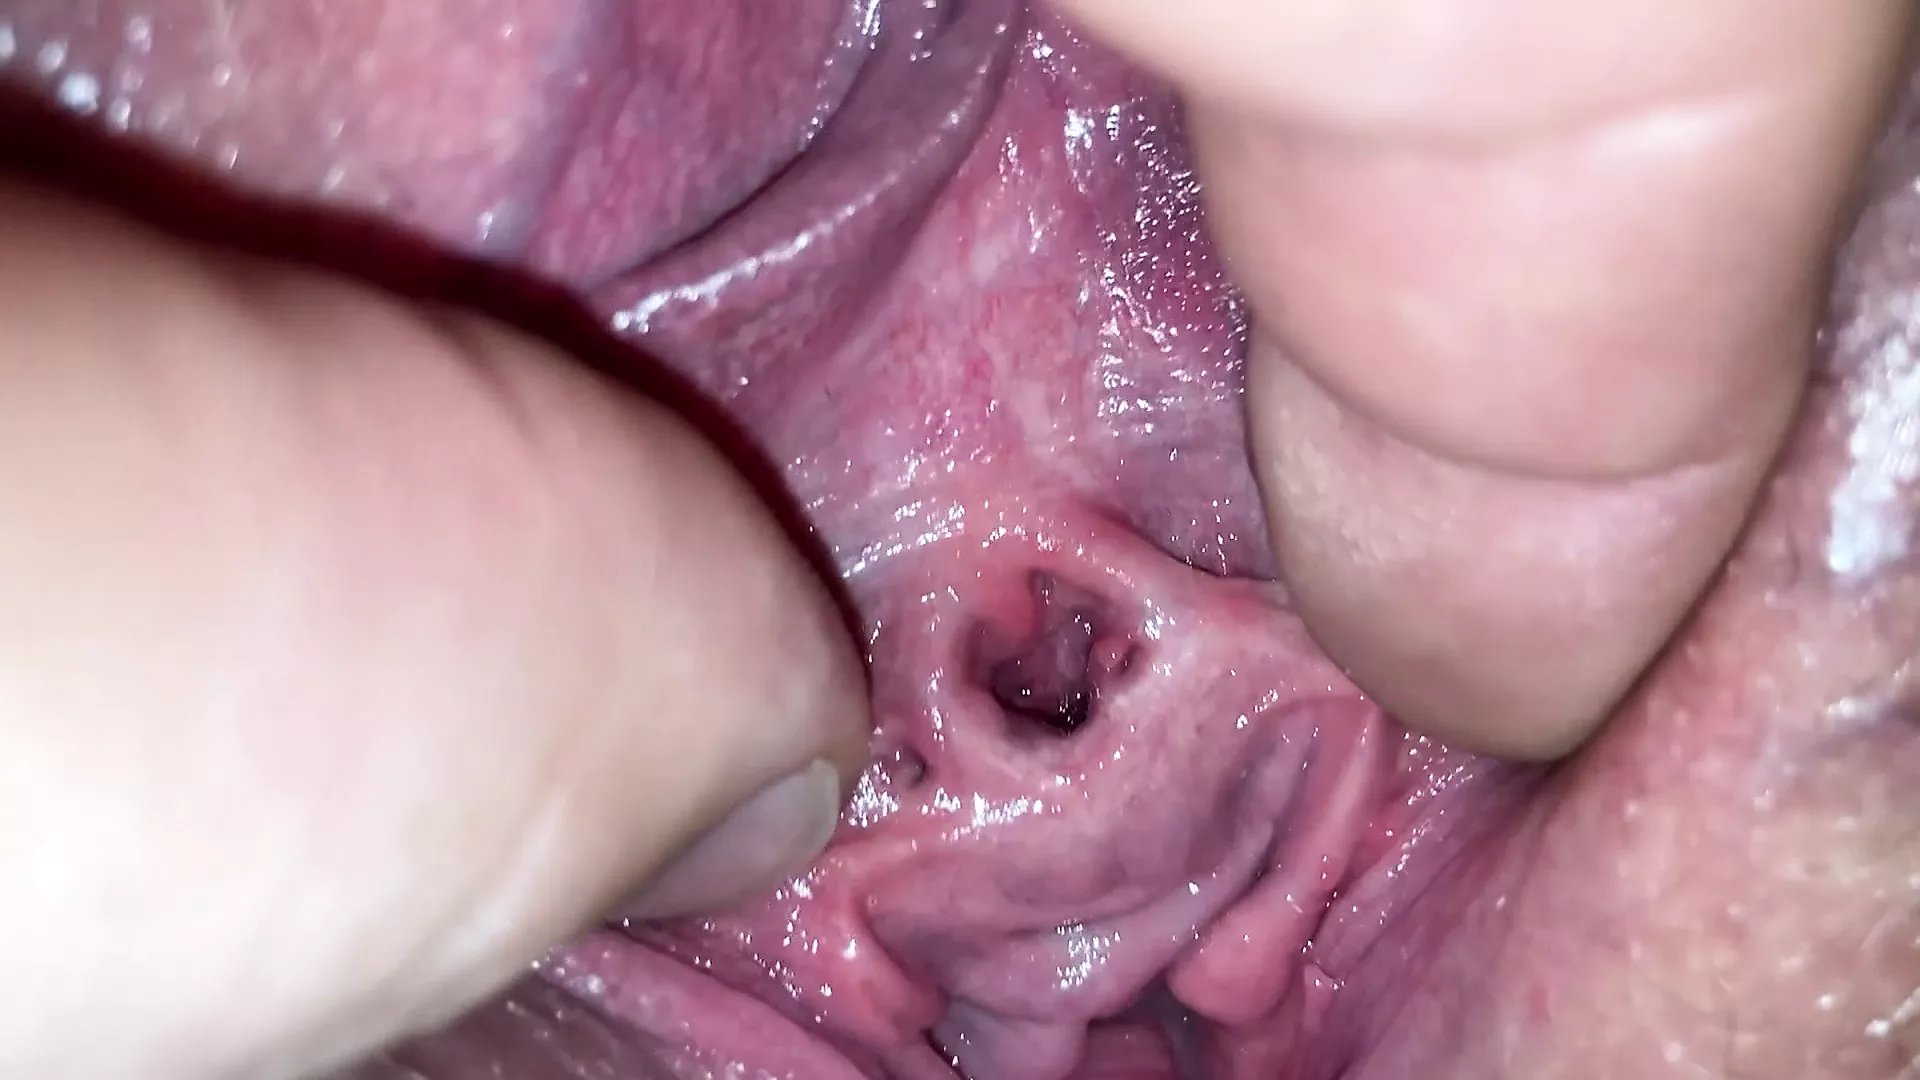 Exposed close up pov BBW open peehole fingering. BBW ass worship. Borr and Sirens Delight picture